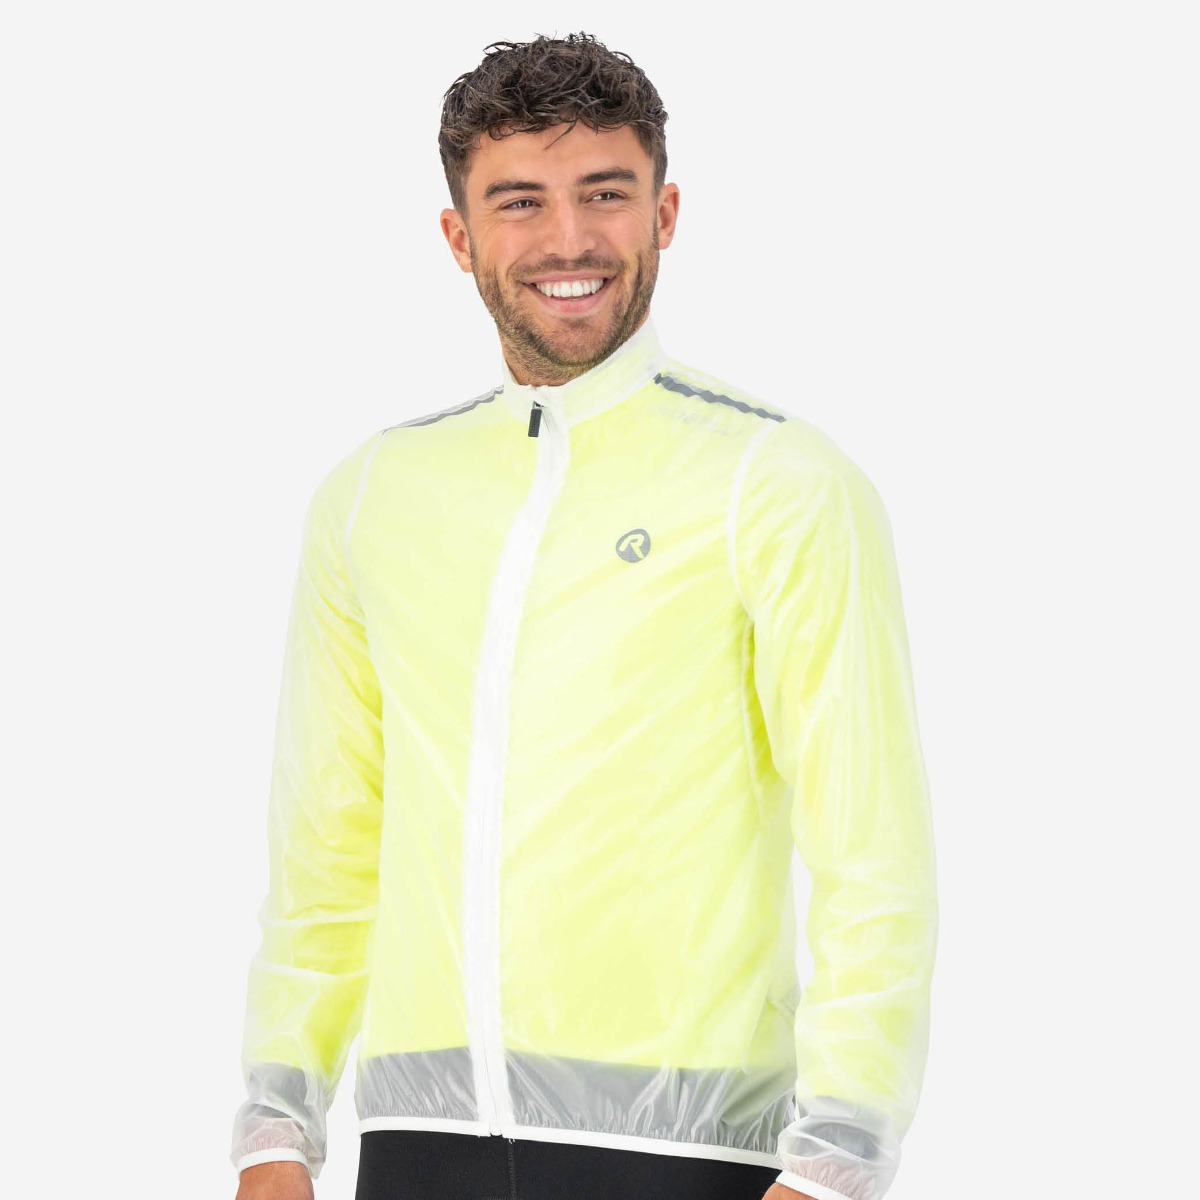 Cyclist with Rogelli's Emergency rain jacket, ready for unexpected rain showers